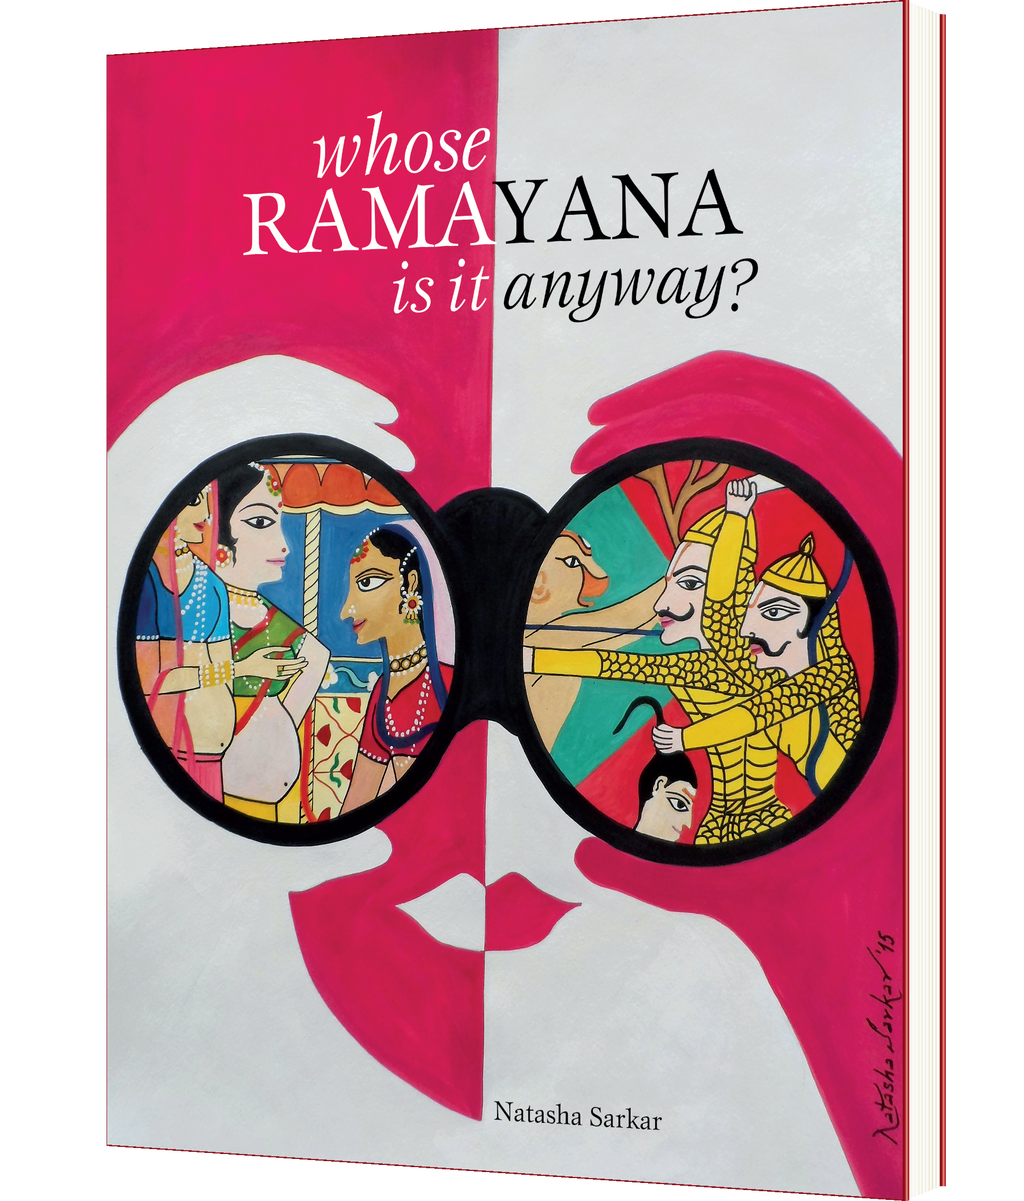 Whose RAMAYANA is it anyway?